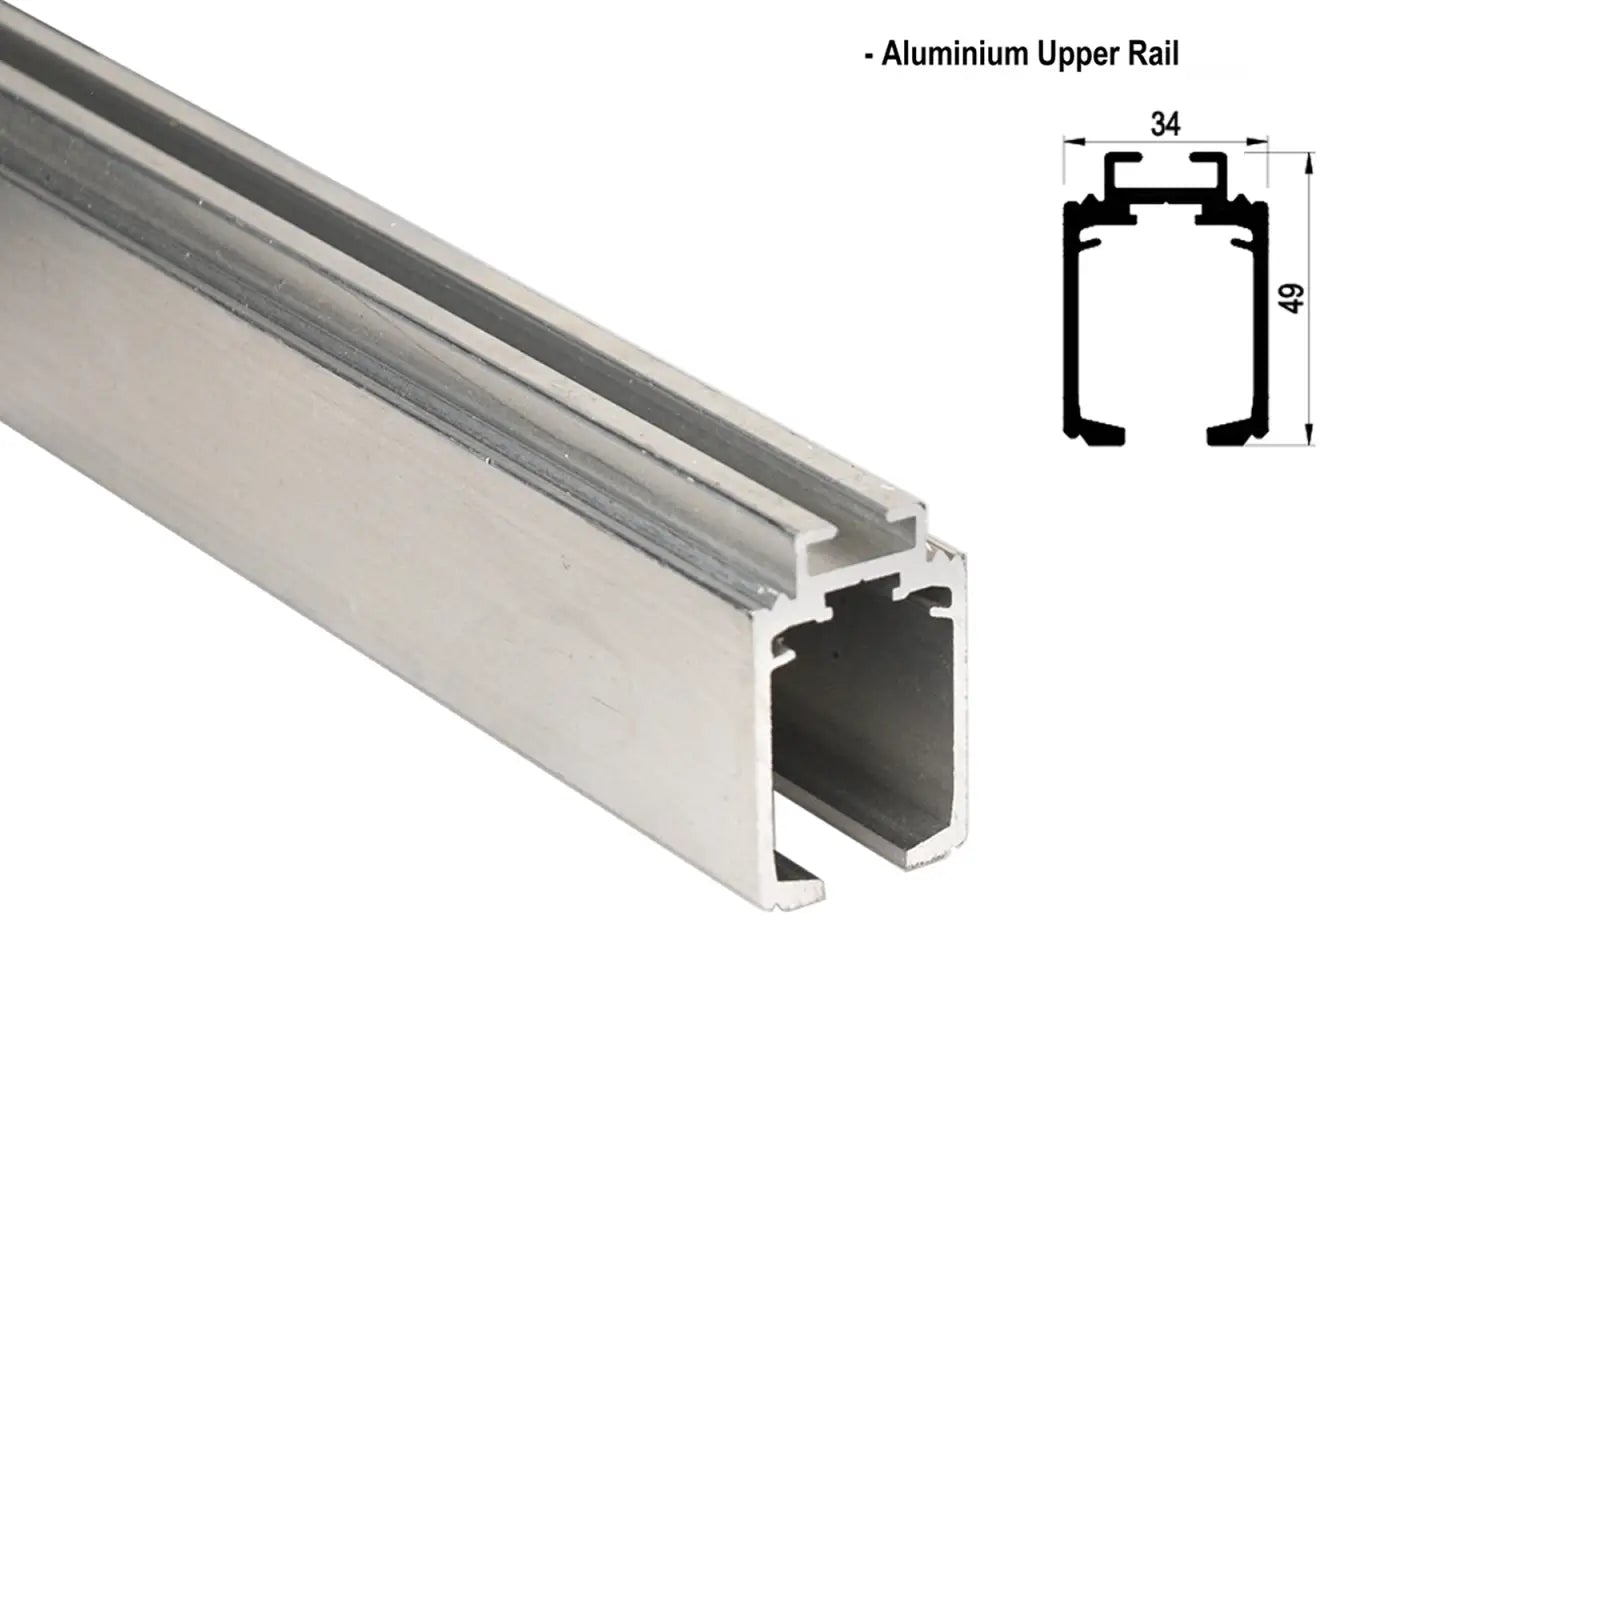 DS-Slide Double Synchro Sliding Door Kit - 3600mm Track - Both Way Soft Close - Decor And Decor